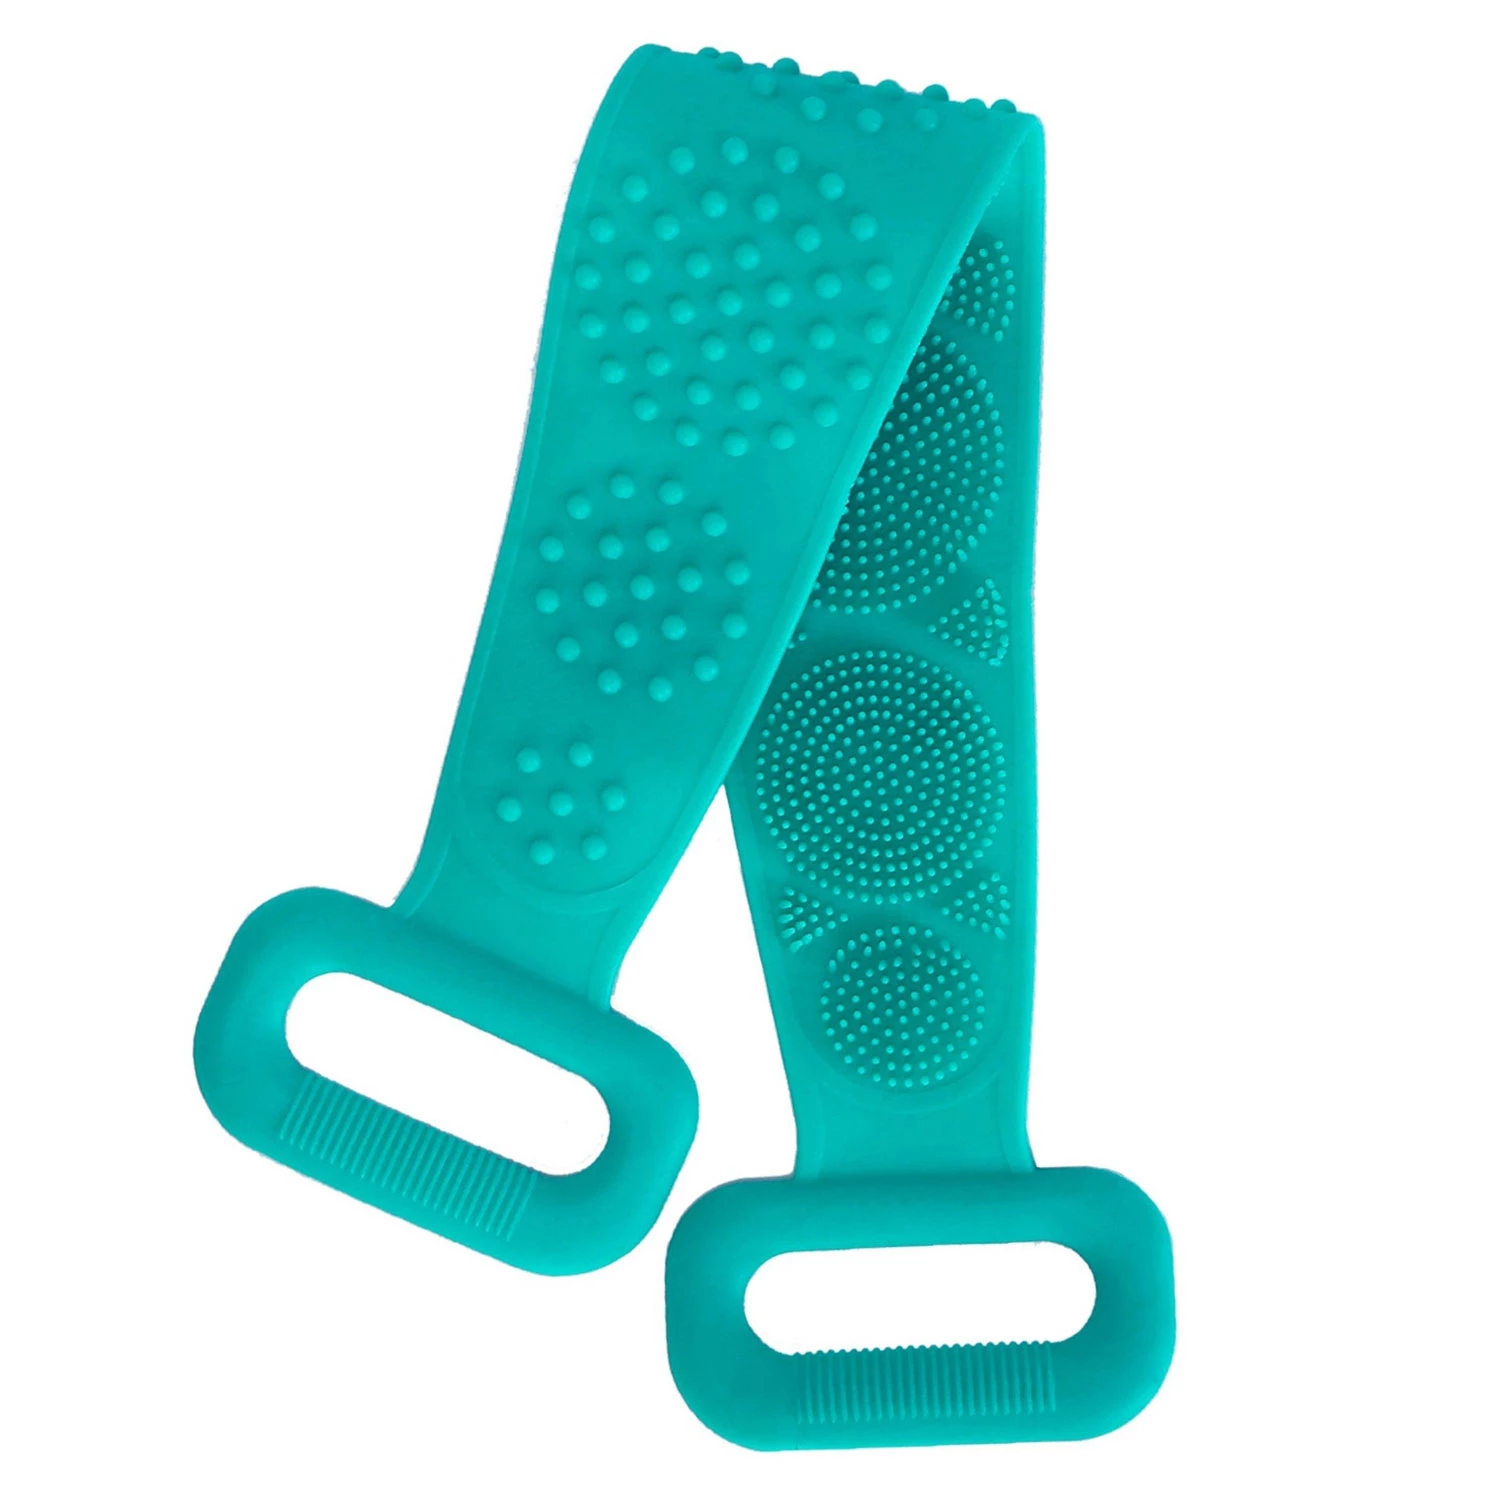 Exfoliating Silicone Body Scrubber Belt with Massage Dots - Shower Strap Brush with Adhesive Hook